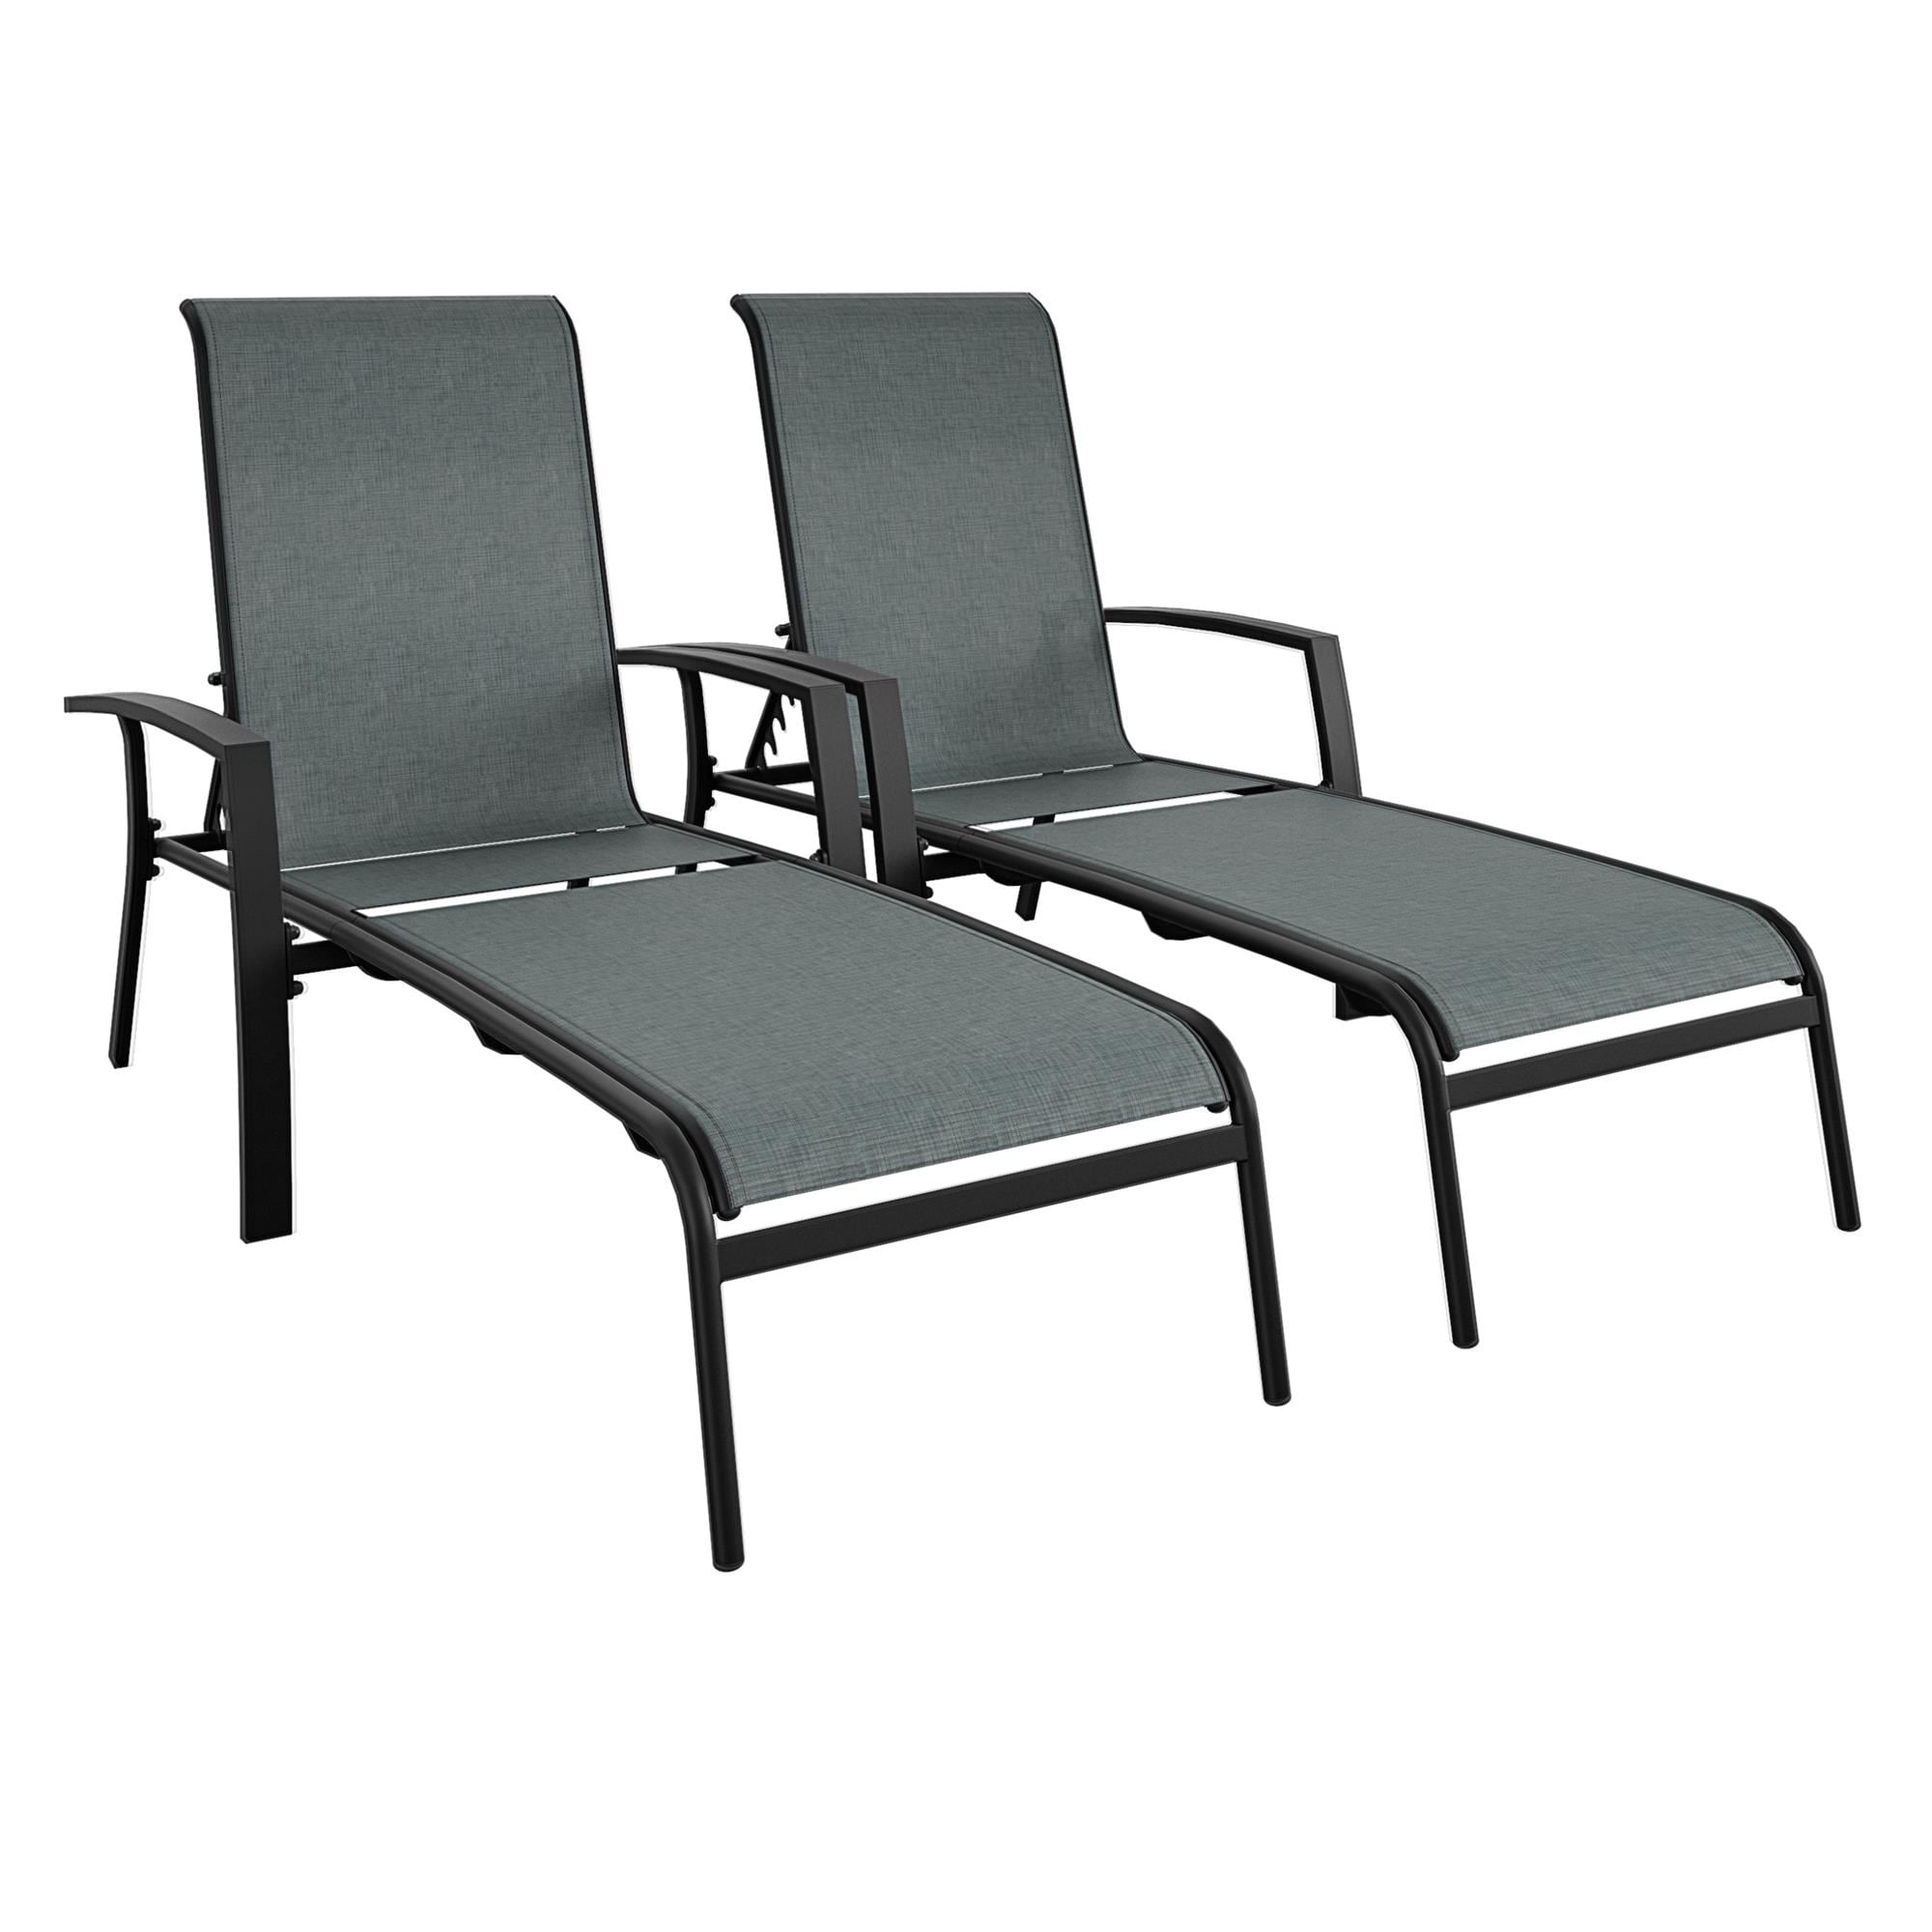 Cosco Outdoor Aluminum Chaise Lounge Chair (set Of 2) - N/a